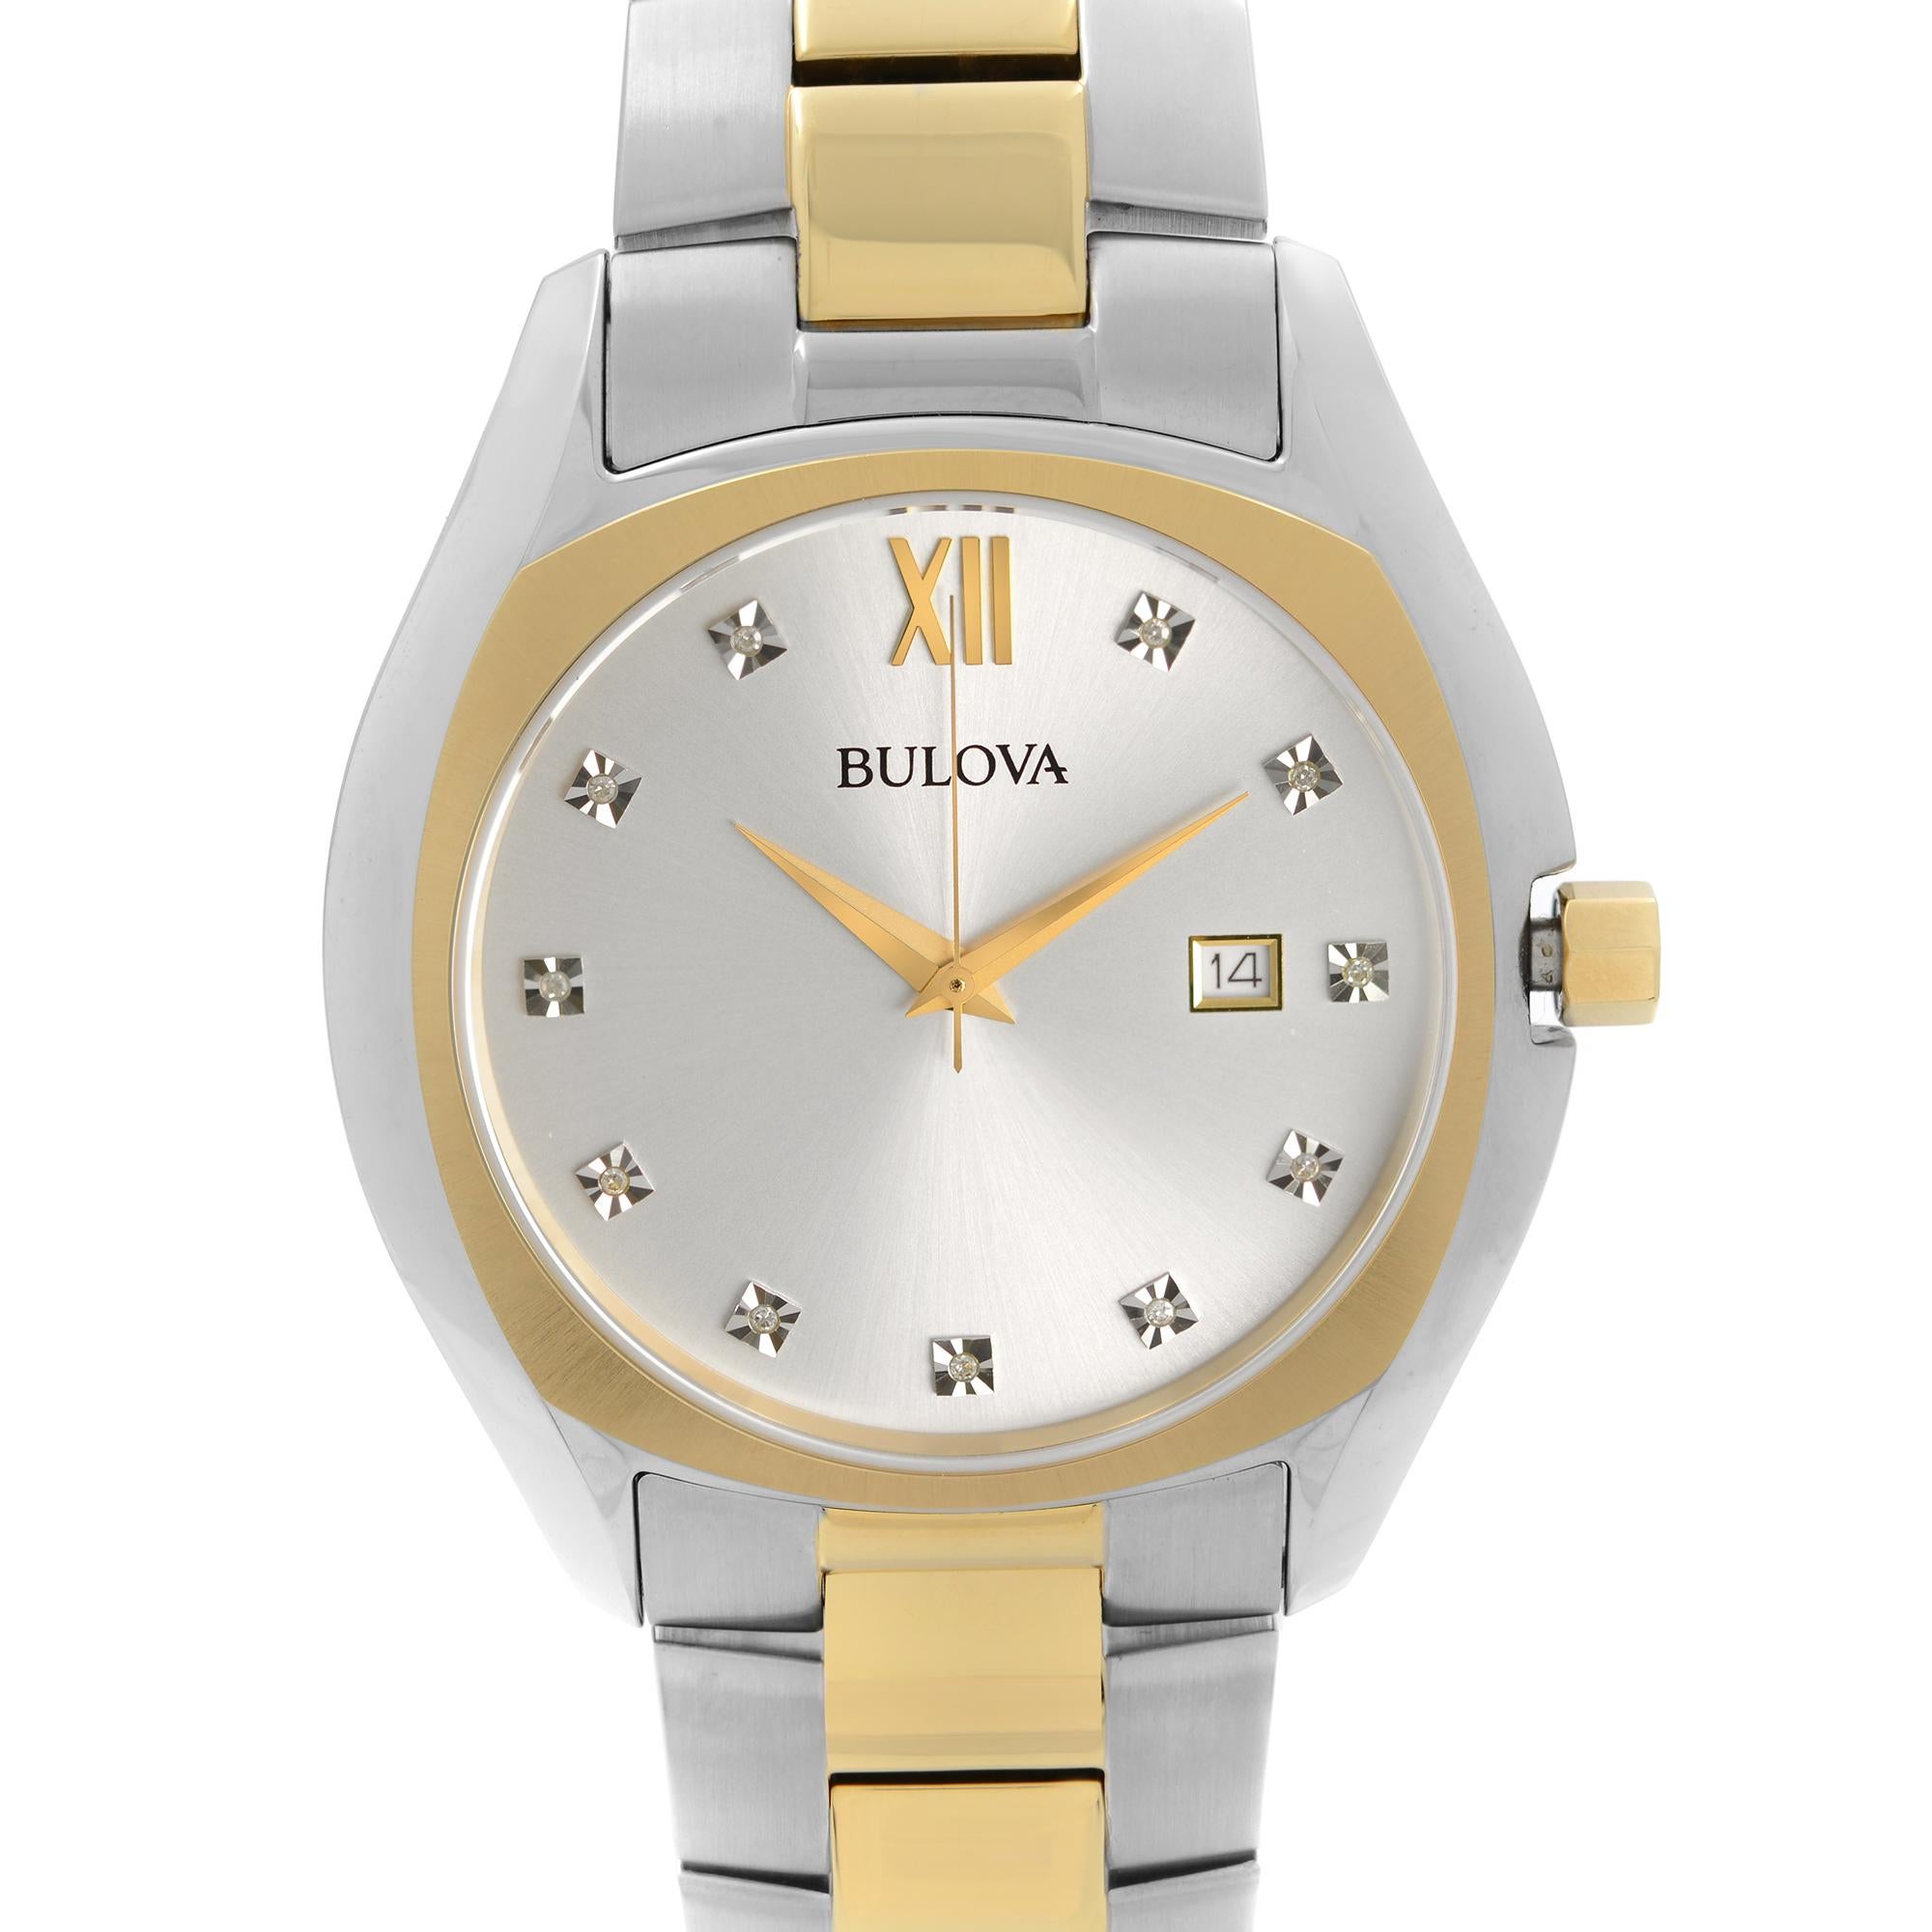 Display Model Bulova Classic Quartz Watch 98D125. Minor Scratches on the Gold-Tone Links From Storing. This Beautiful Timepiece is Powered by Quartz (Battery) Movement And Features: Round Stainless Steel Case with a Steel & Gold-Tone Bracelet, Fixed